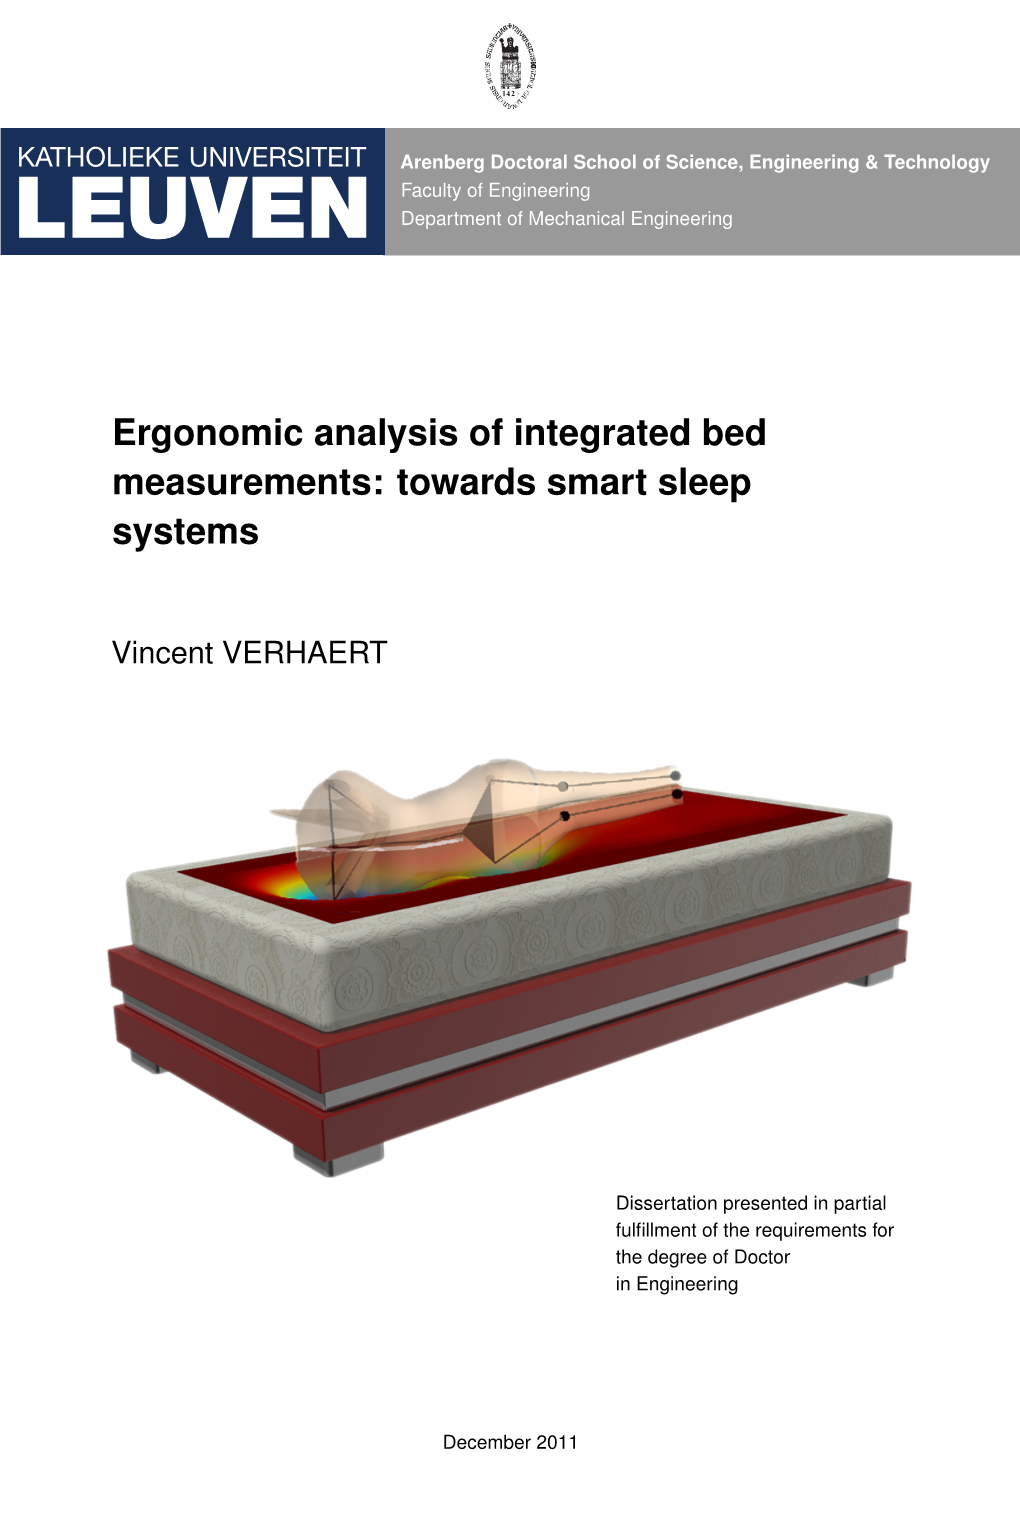 Ergonomic Analysis of Integrated Bed Measurements: Towards Smart Sleep Systems